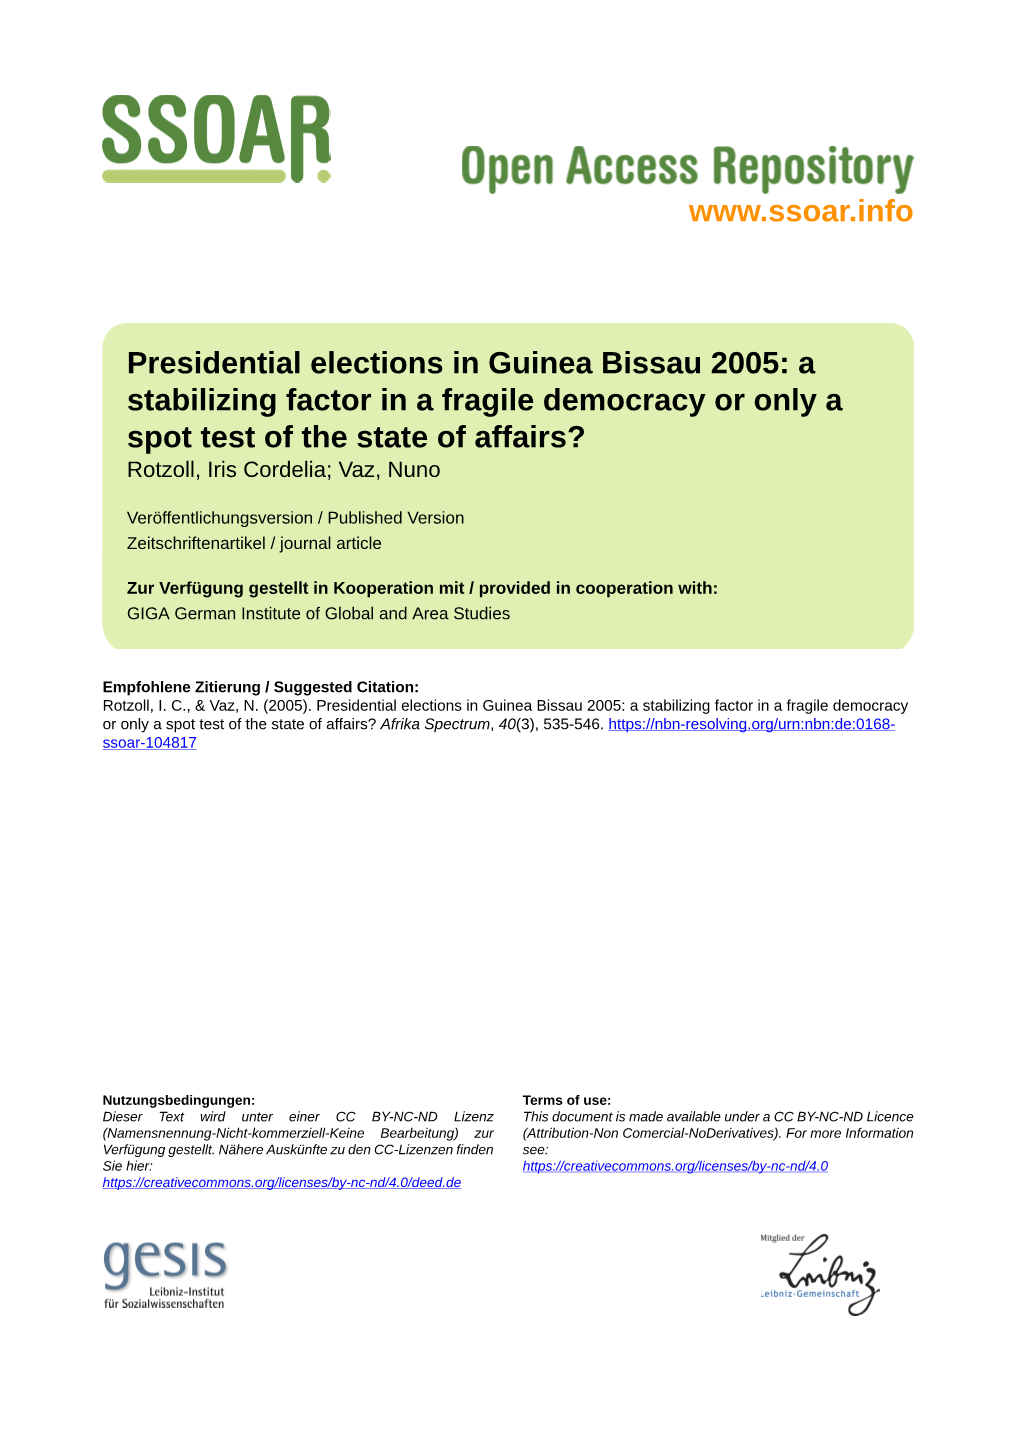 Presidential Elections in Guinea Bissau 2005: a Stabilizing Factor in A